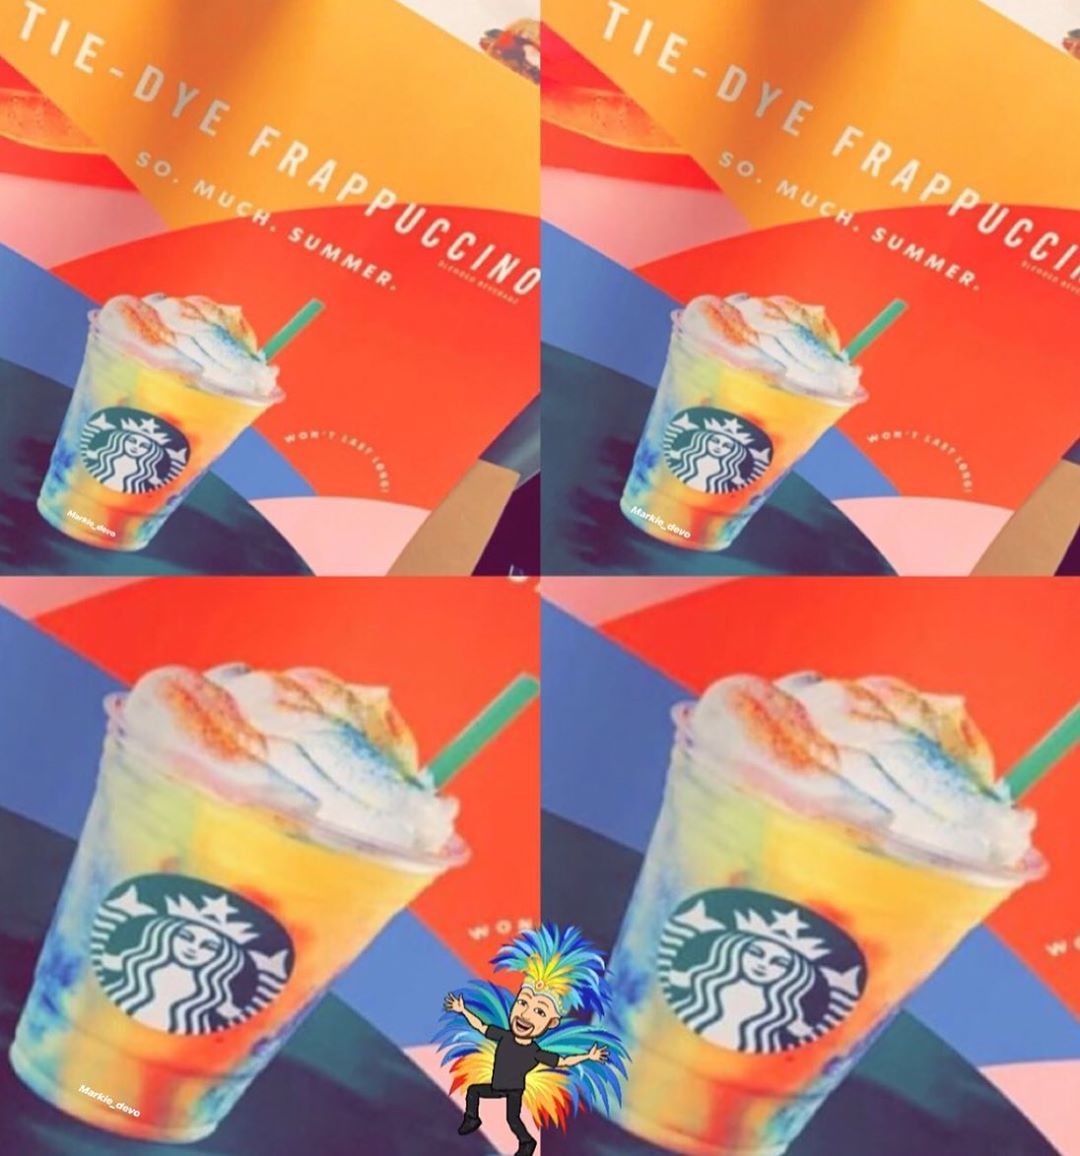 Starbucks Is Likely Launching Tie Dye Frappuccinos This July - 